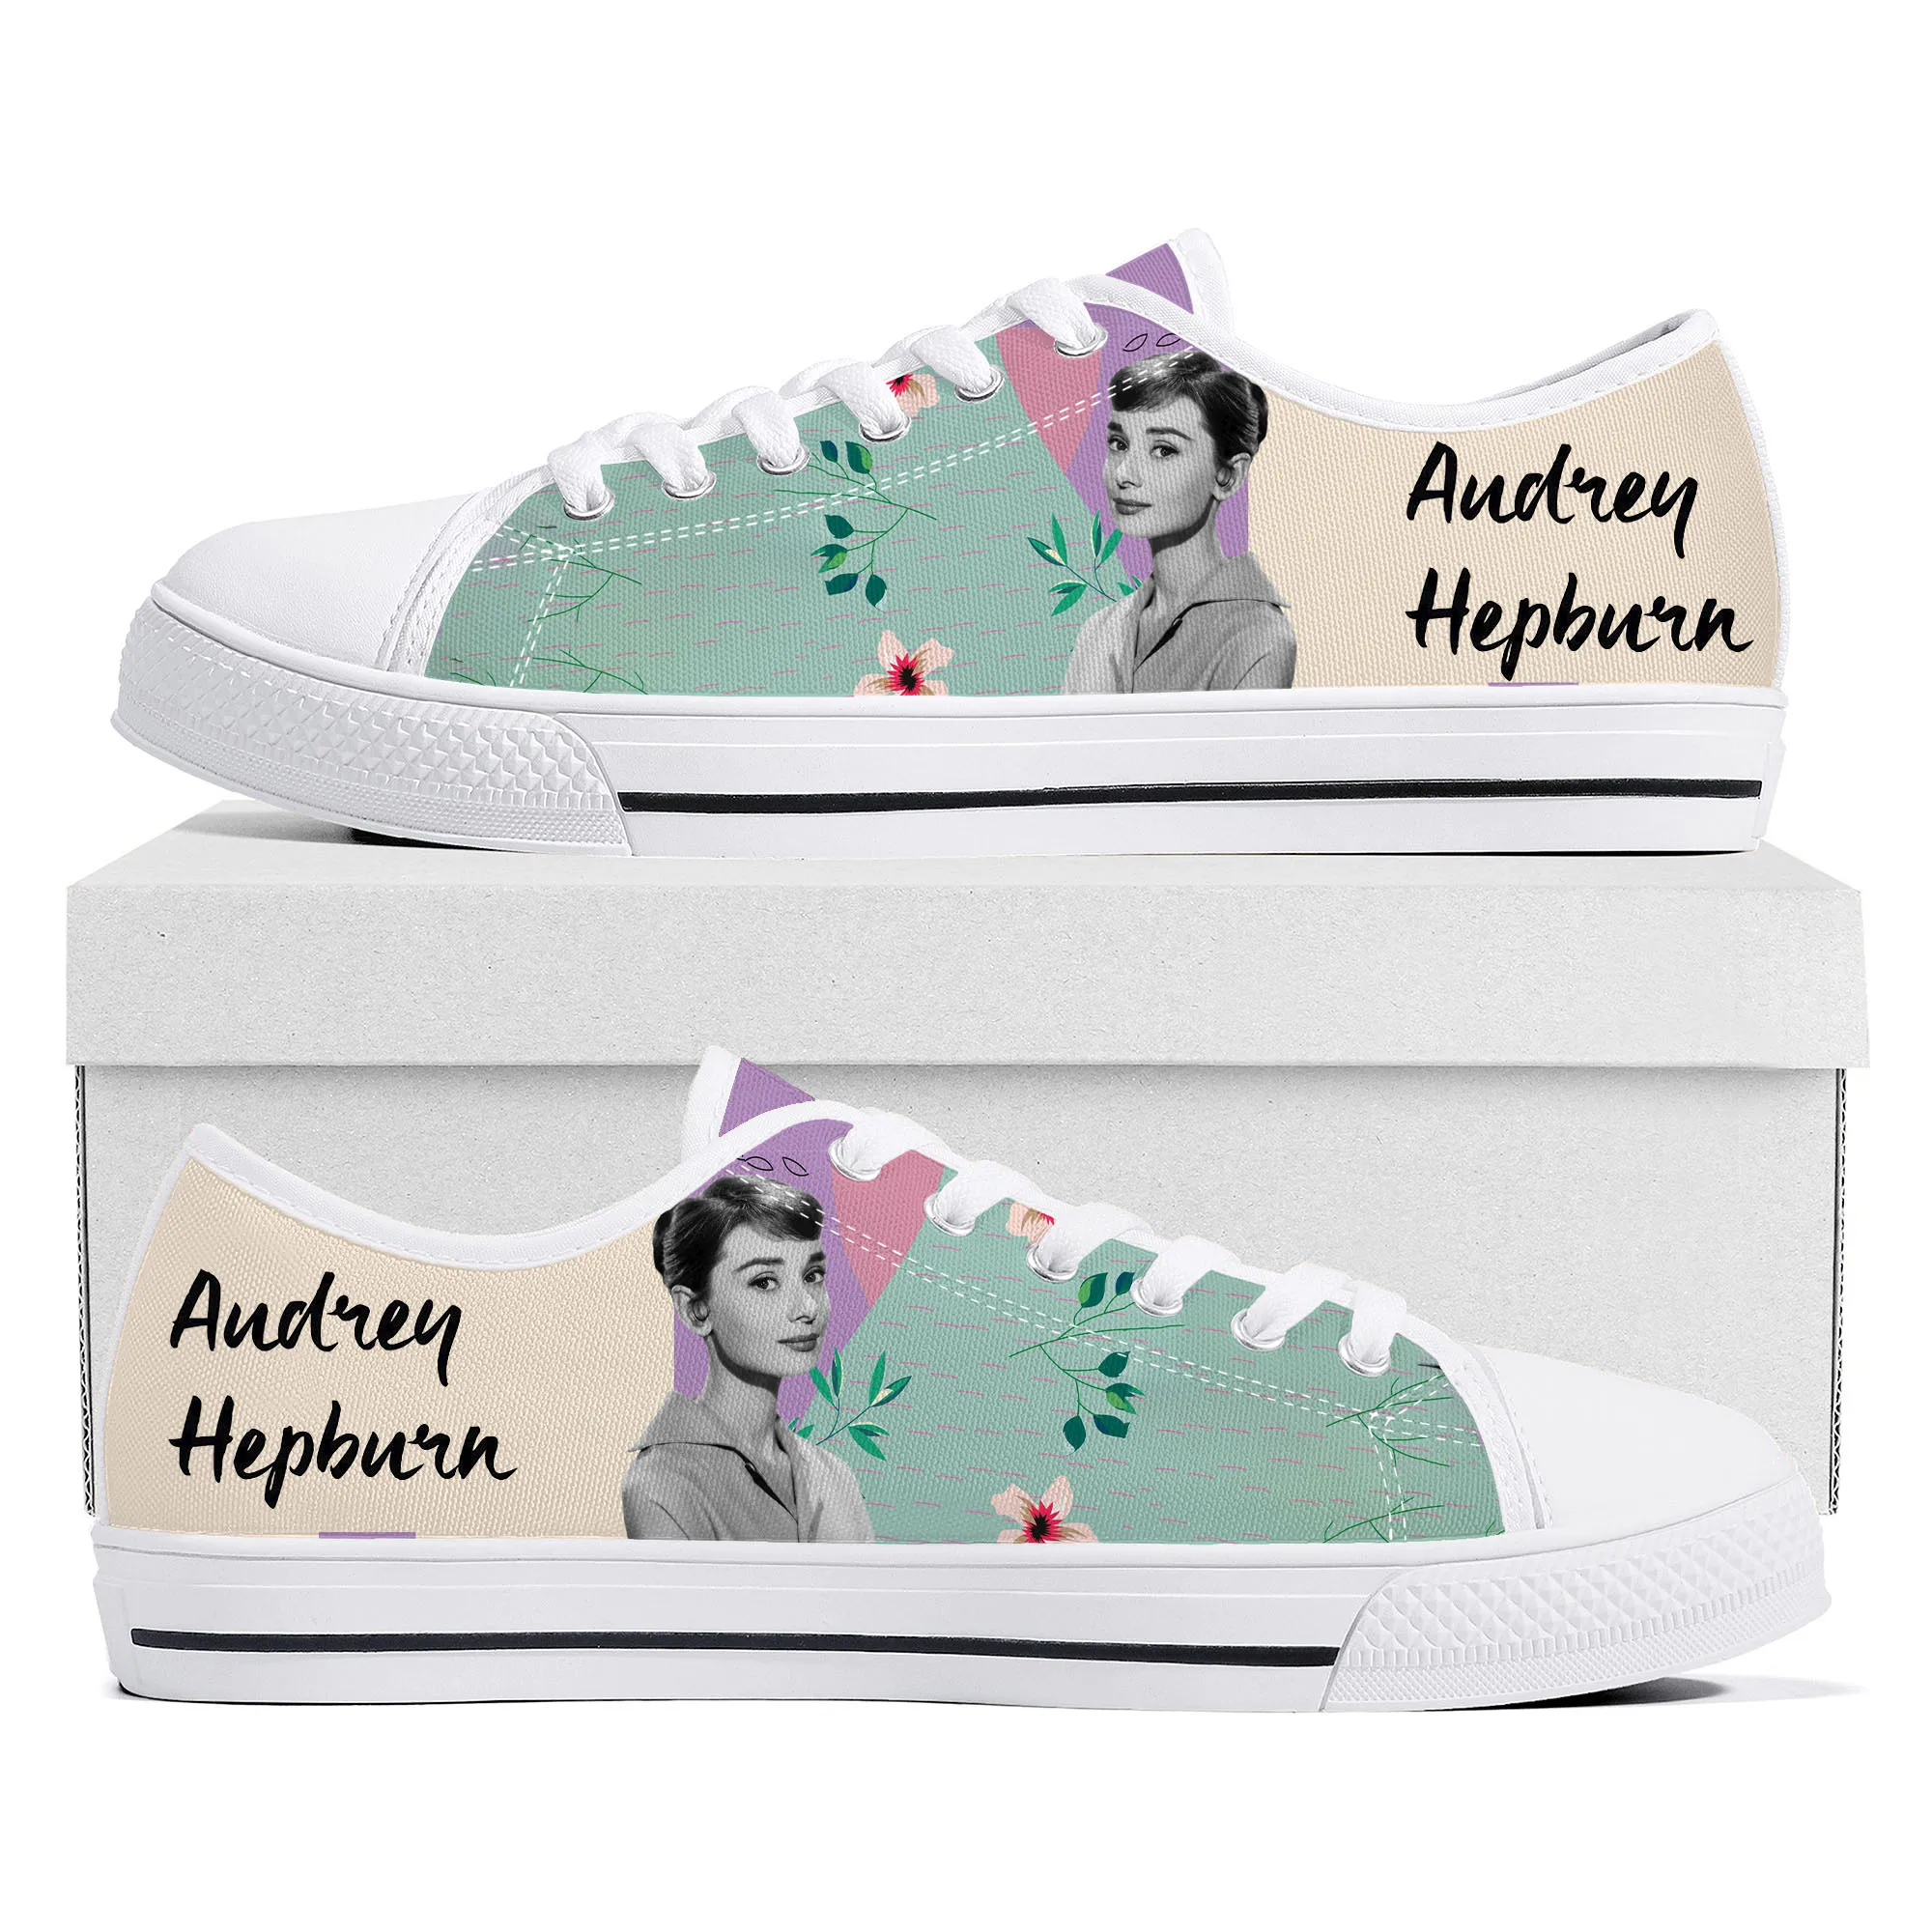 

Audrey Hepburn Low Top Sneakers Mens Womens Teenager Canvas High Quality Sneaker Casual Custom Made Shoes Customize DIY Shoe